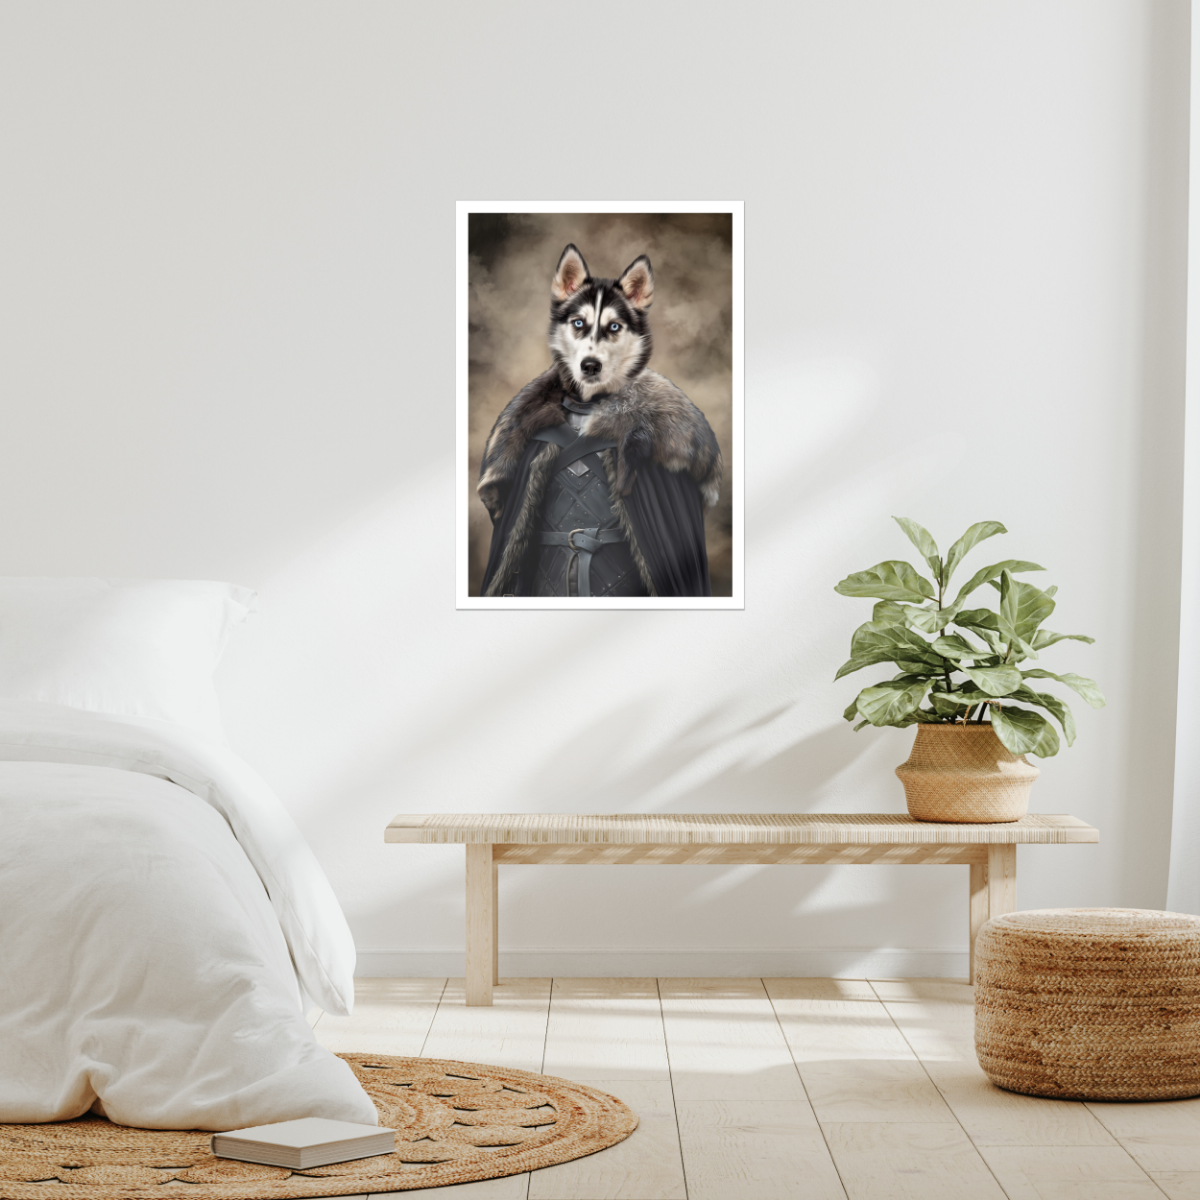 The Iron King (GOT Inspired): Custom Pet Poster - Paw & Glory - #pet portraits# - #dog portraits# - #pet portraits uk#Paw & Glory, paw and glory, pet portraits funny classic dog art personalised cat portrait cat portraits photography pet portrait costume boyfriend gifts pet portraits